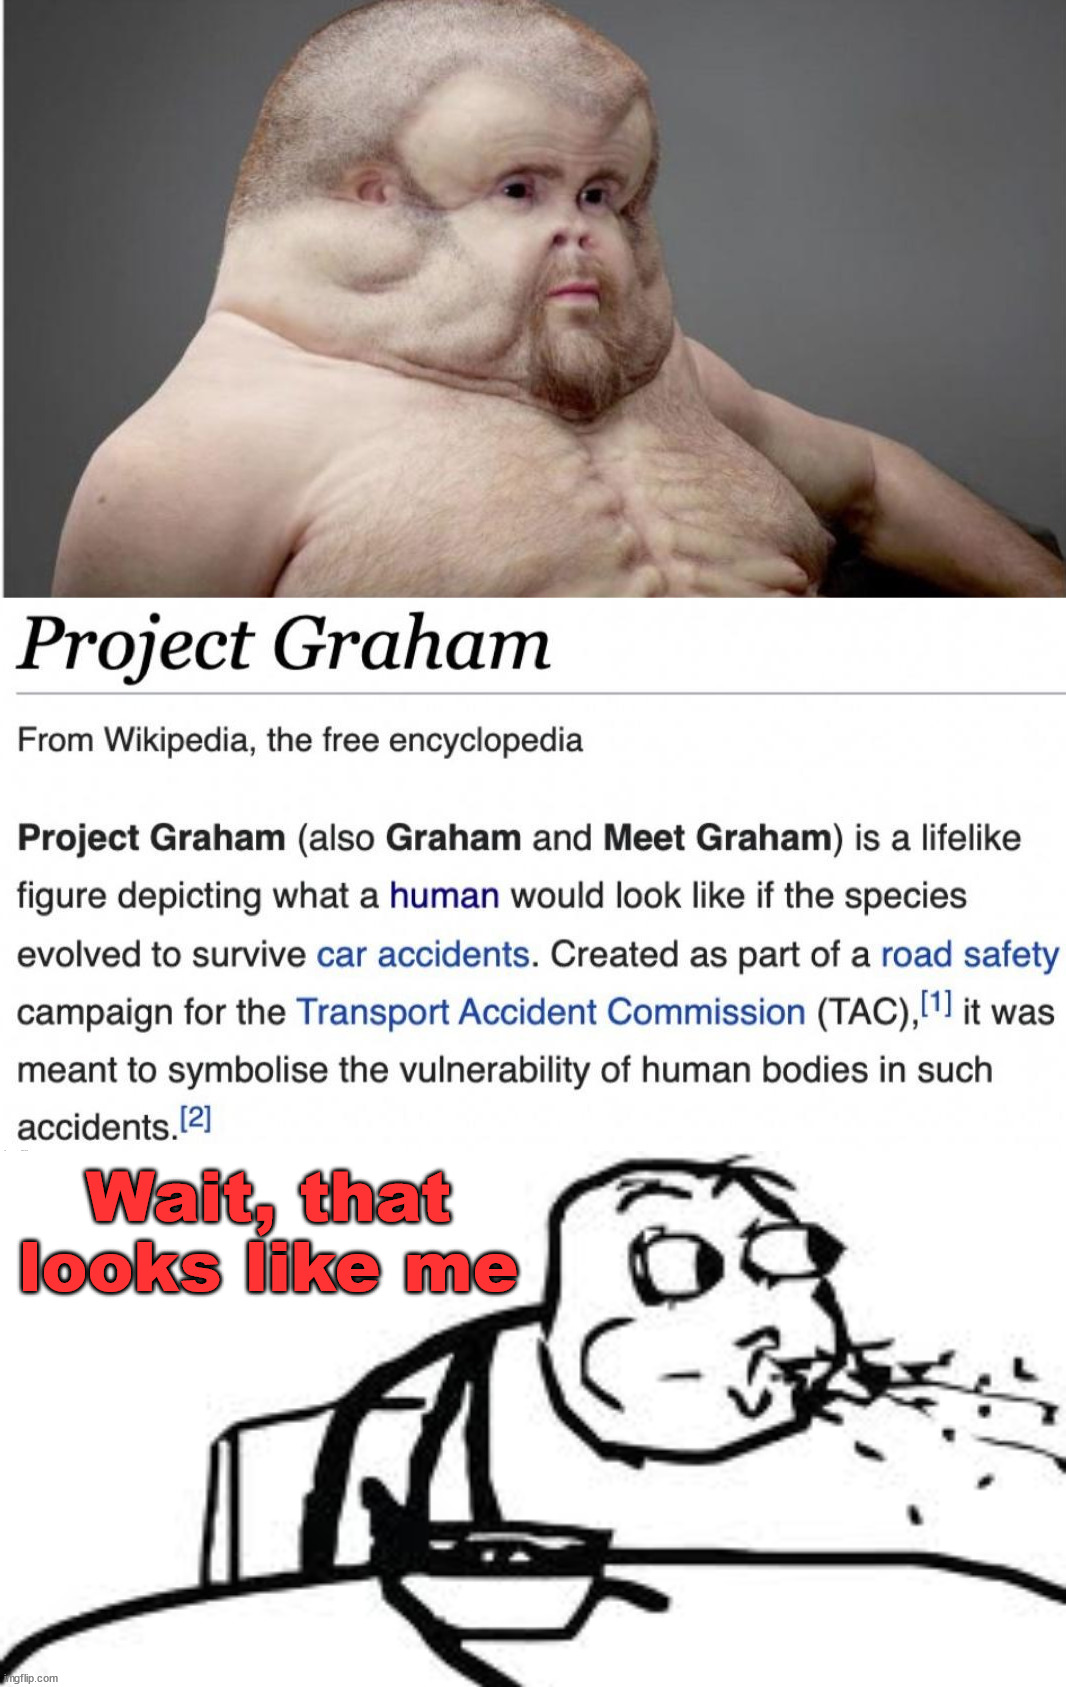 Wait, that looks like me | image tagged in memes,cereal guy spitting,science | made w/ Imgflip meme maker